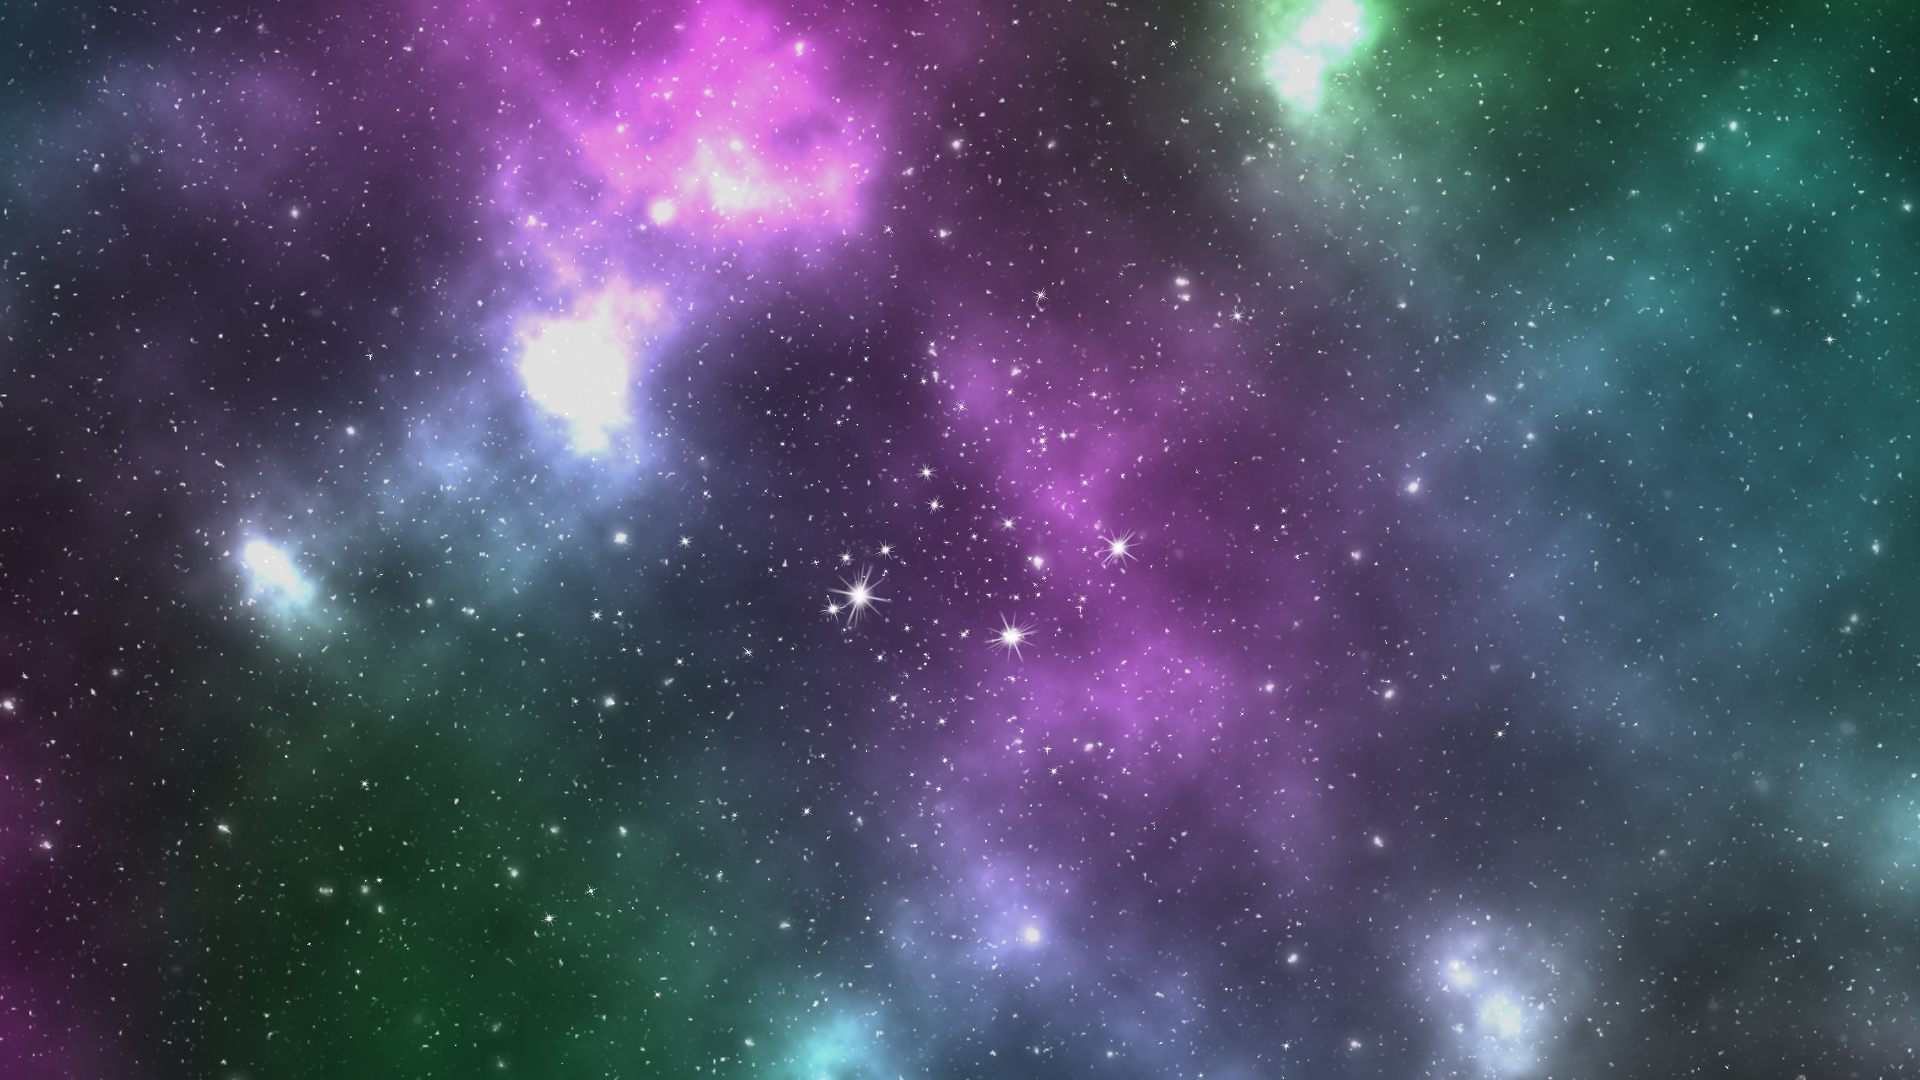 Starfield for apple download